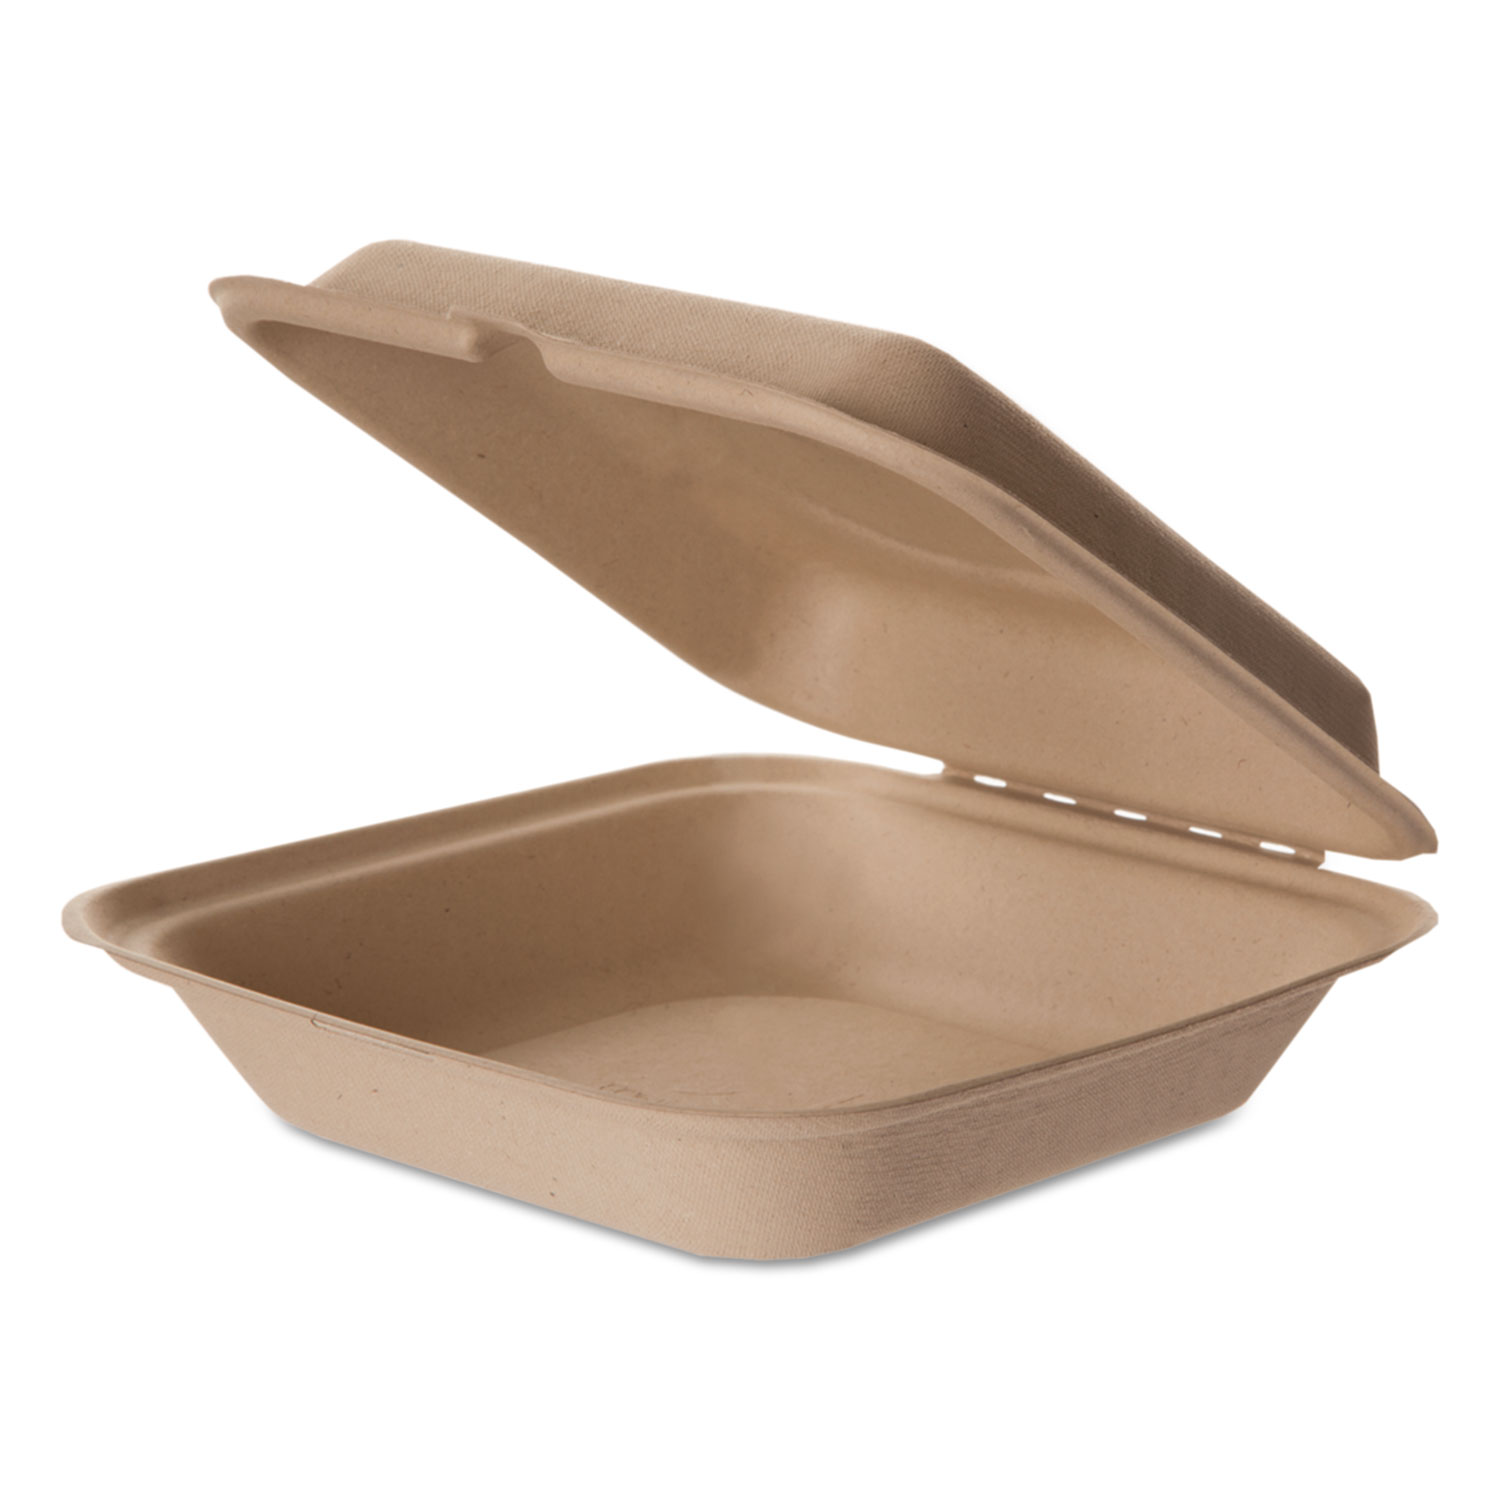 Wheat Straw Hinged Clamshell Containers, 8 x 8 x 3, 200/Carton